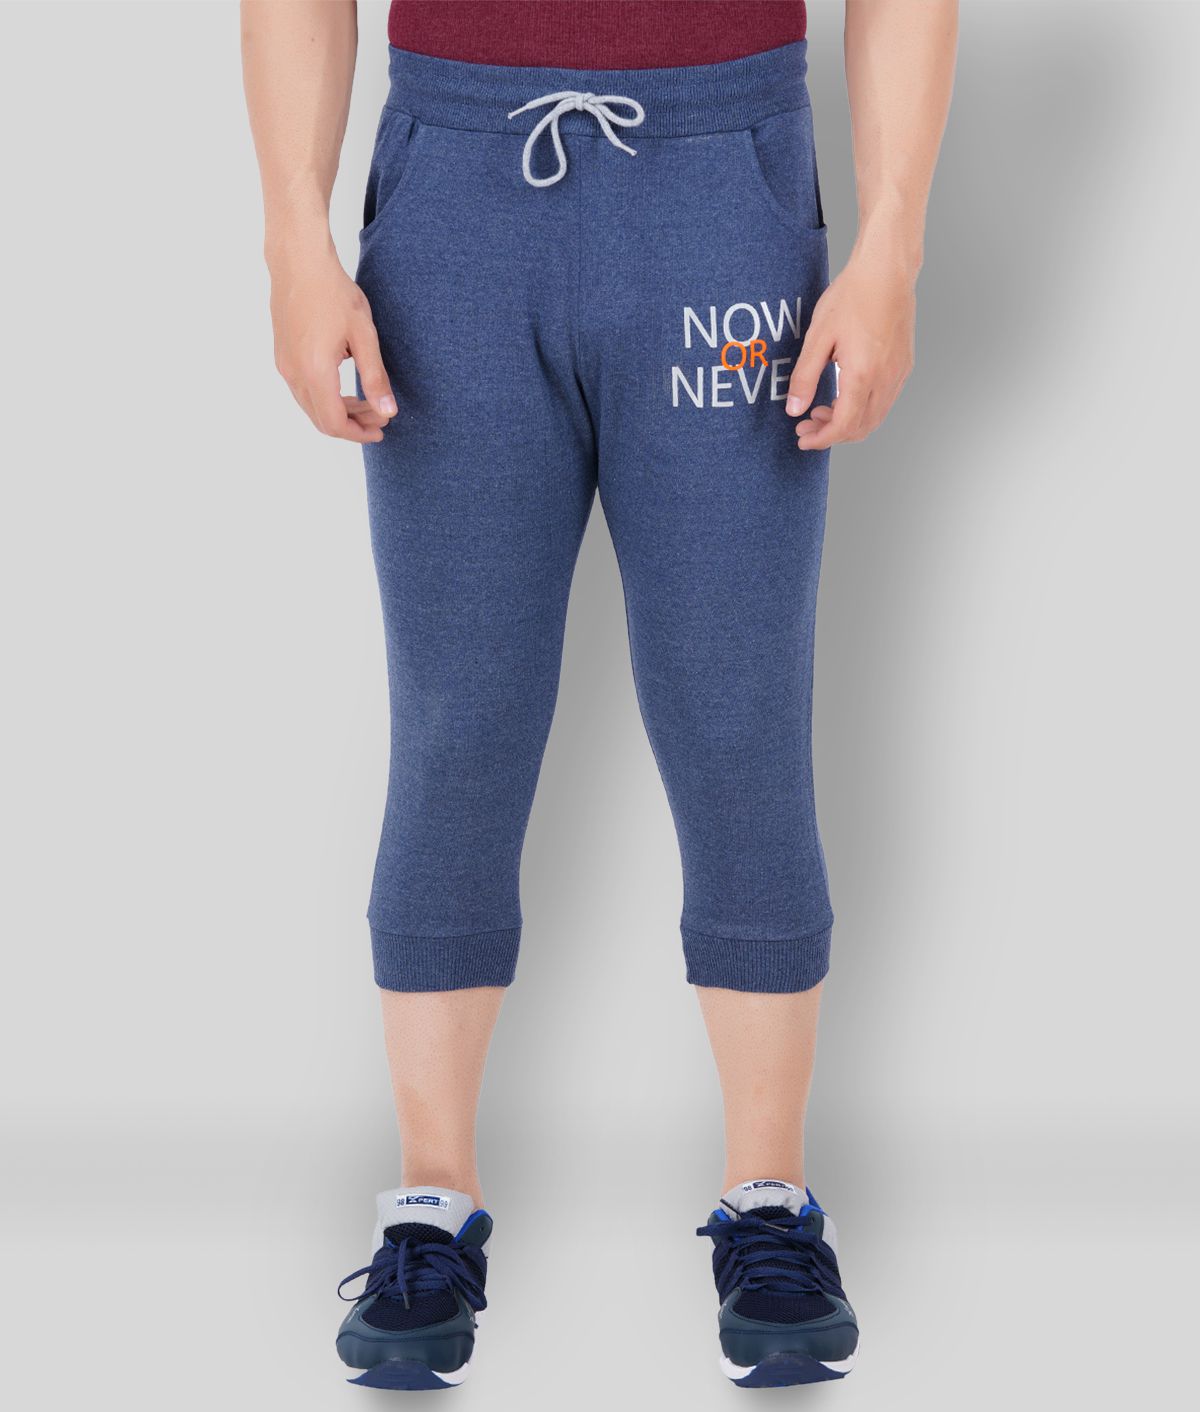     			NOW OR NEVER - Blue Cotton Blend Men's Three-Fourths ( Pack of 1 )